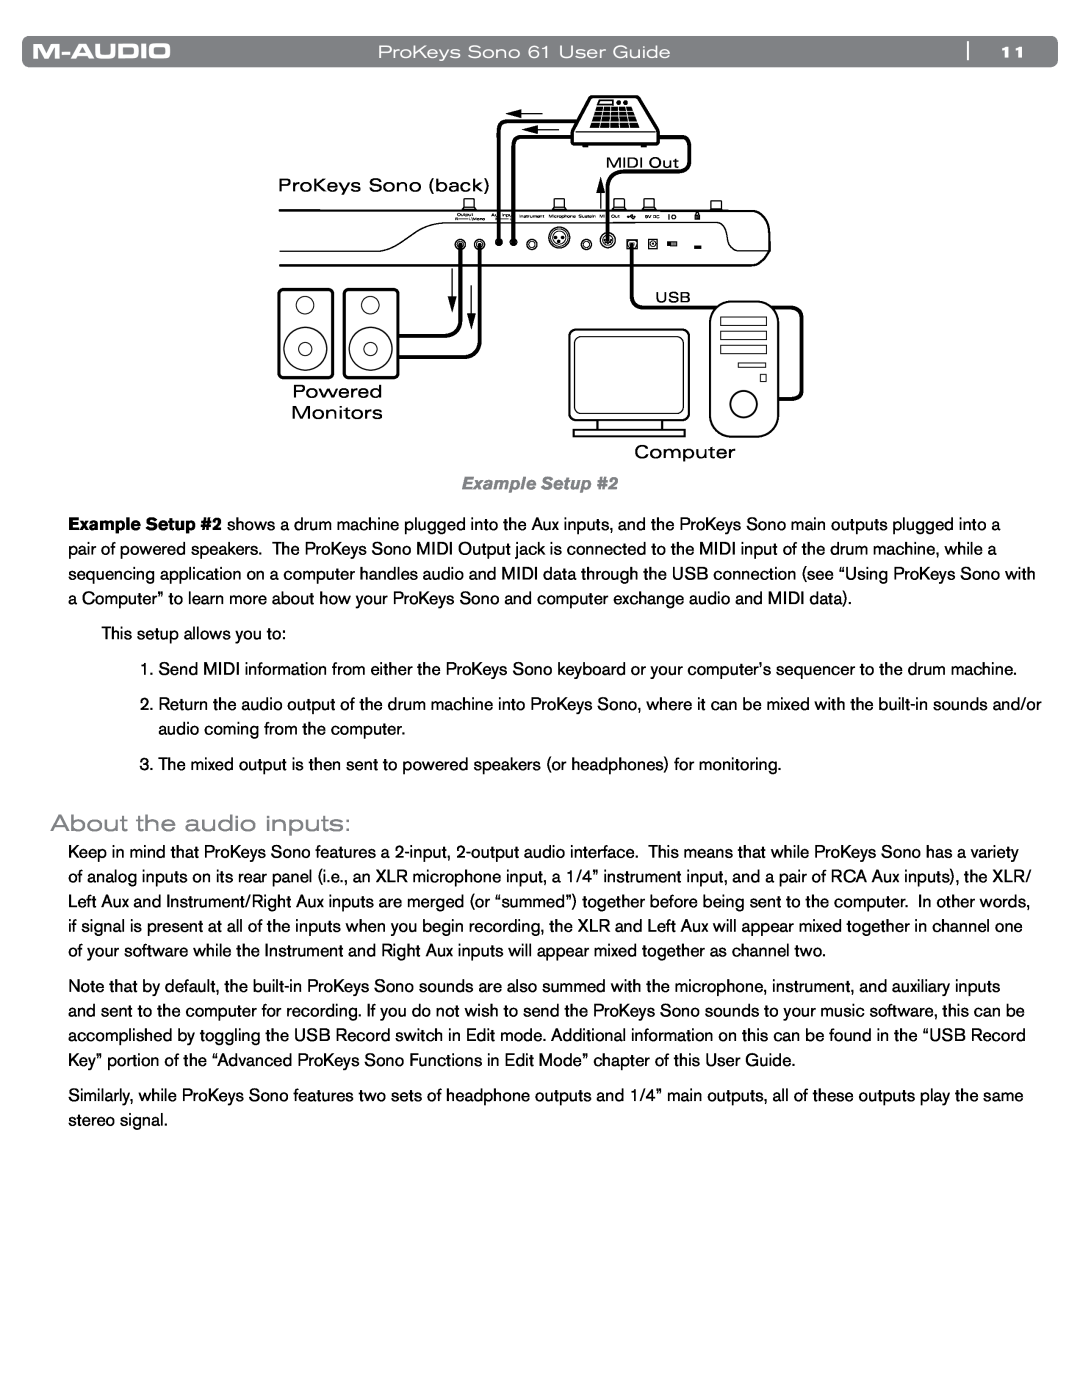 M-Audio SONO 61 manual About the audio inputs, Example Setup #2, ProKeys Sono 61 User Guide 